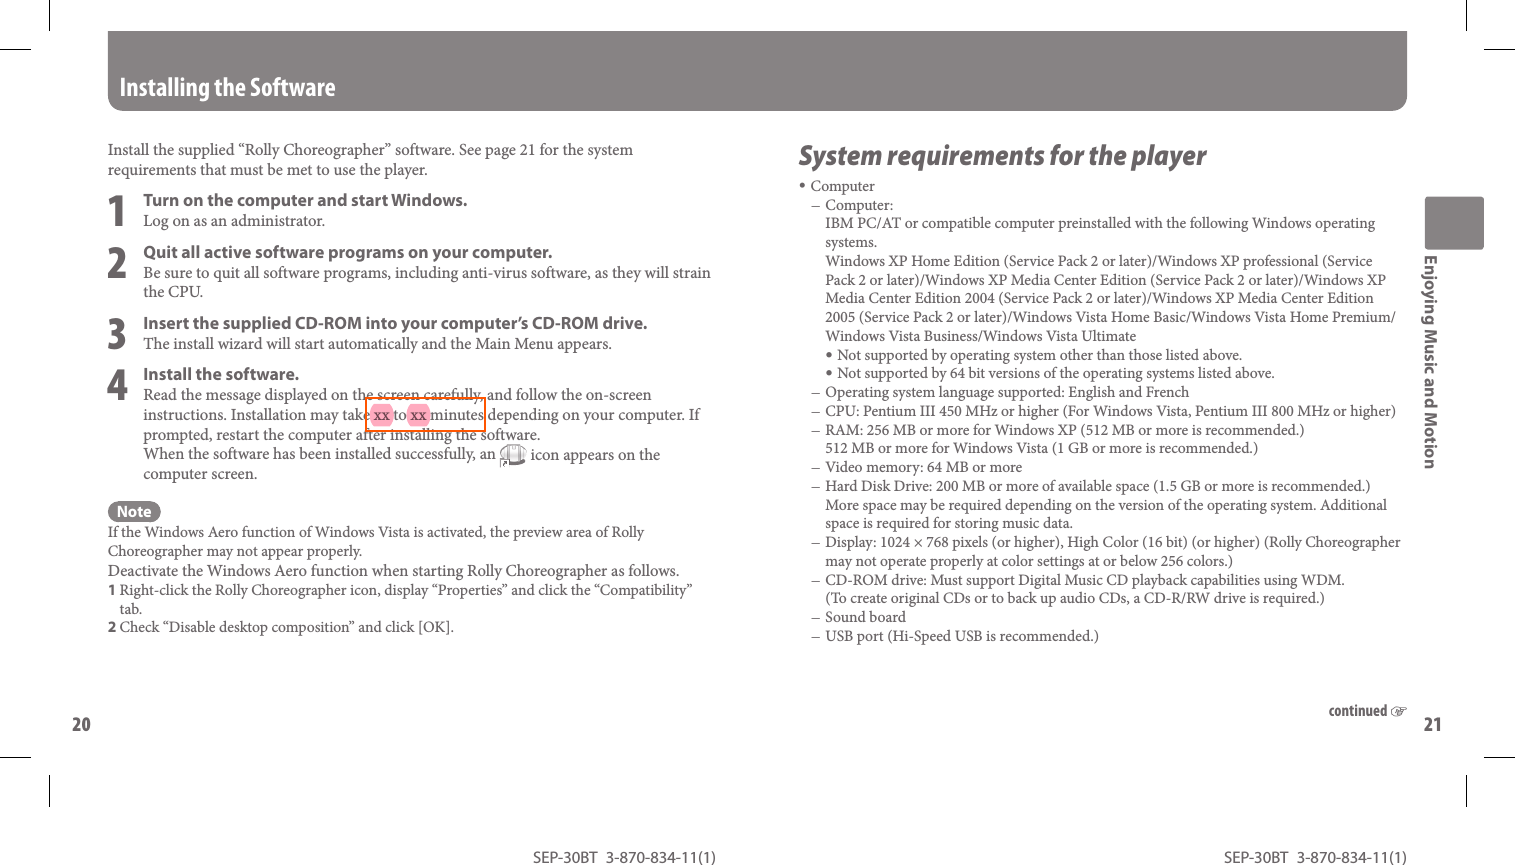 SEP-30BT 3-870-834-11(1)20SEP-30BT 3-870-834-11(1)21 Install the supplied “ Rolly Choreographer” software. See page 21 for the system requirements that must be met to use the player.1  Turn on the computer and start Windows.Log on as an administrator.2  Quit all active software programs on your computer.Be sure to quit all software programs, including anti-virus software, as they will strain the CPU.3  Insert the supplied CD-ROM into your computer’s CD-ROM drive.The install wizard will start automatically and the Main Menu appears.4  Install the software.Read the message displayed on the screen carefully, and follow the on-screen instructions. Installation may take xx to xx minutes depending on your computer. If prompted, restart the computer after installing the software.When the software has been installed successfully, an   icon appears on the computer screen.NoteIf the Windows Aero function of Windows Vista is activated, the preview area of Rolly Choreographer may not appear properly.Deactivate the Windows Aero function when starting Rolly Choreographer as follows.1 Right-click the Rolly Choreographer icon, display “Properties” and click the “Compatibility” tab.2 Check “Disable desktop composition” and click [OK]. Installing the Software System requirements for the playerComputerComputer:IBM PC/AT or compatible computer preinstalled with the following Windows operating systems. Windows XP Home Edition (Service Pack 2 or later)/Windows XP professional (Service Pack 2 or later)/Windows XP Media Center Edition (Service Pack 2 or later)/Windows XP Media Center Edition 2004 (Service Pack 2 or later)/Windows XP Media Center Edition 2005 (Service Pack 2 or later)/Windows Vista Home Basic/Windows Vista Home Premium/Windows Vista Business/Windows Vista Ultimate Not supported by operating system other than those listed above. Not supported by 64 bit versions of the operating systems listed above.Operating system language supported: English and FrenchCPU: Pentium III 450 MHz or higher (For Windows Vista, Pentium III 800 MHz or higher)RAM: 256 MB or more for Windows XP (512 MB or more is recommended.)512 MB or more for Windows Vista (1 GB or more is recommended.)Video memory: 64 MB or moreHard Disk Drive: 200 MB or more of available space (1.5 GB or more is recommended.) More space may be required depending on the version of the operating system. Additional space is required for storing music data.Display: 1024 × 768 pixels (or higher), High Color (16 bit) (or higher) (Rolly Choreographer may not operate properly at color settings at or below 256 colors.) CD-ROM drive: Must support Digital Music CD playback capabilities using WDM.(To create original CDs or to back up audio CDs, a CD-R/RW drive is required.)Sound boardUSB port (Hi-Speed USB is recommended.)Enjoying Music and Motioncontinued 